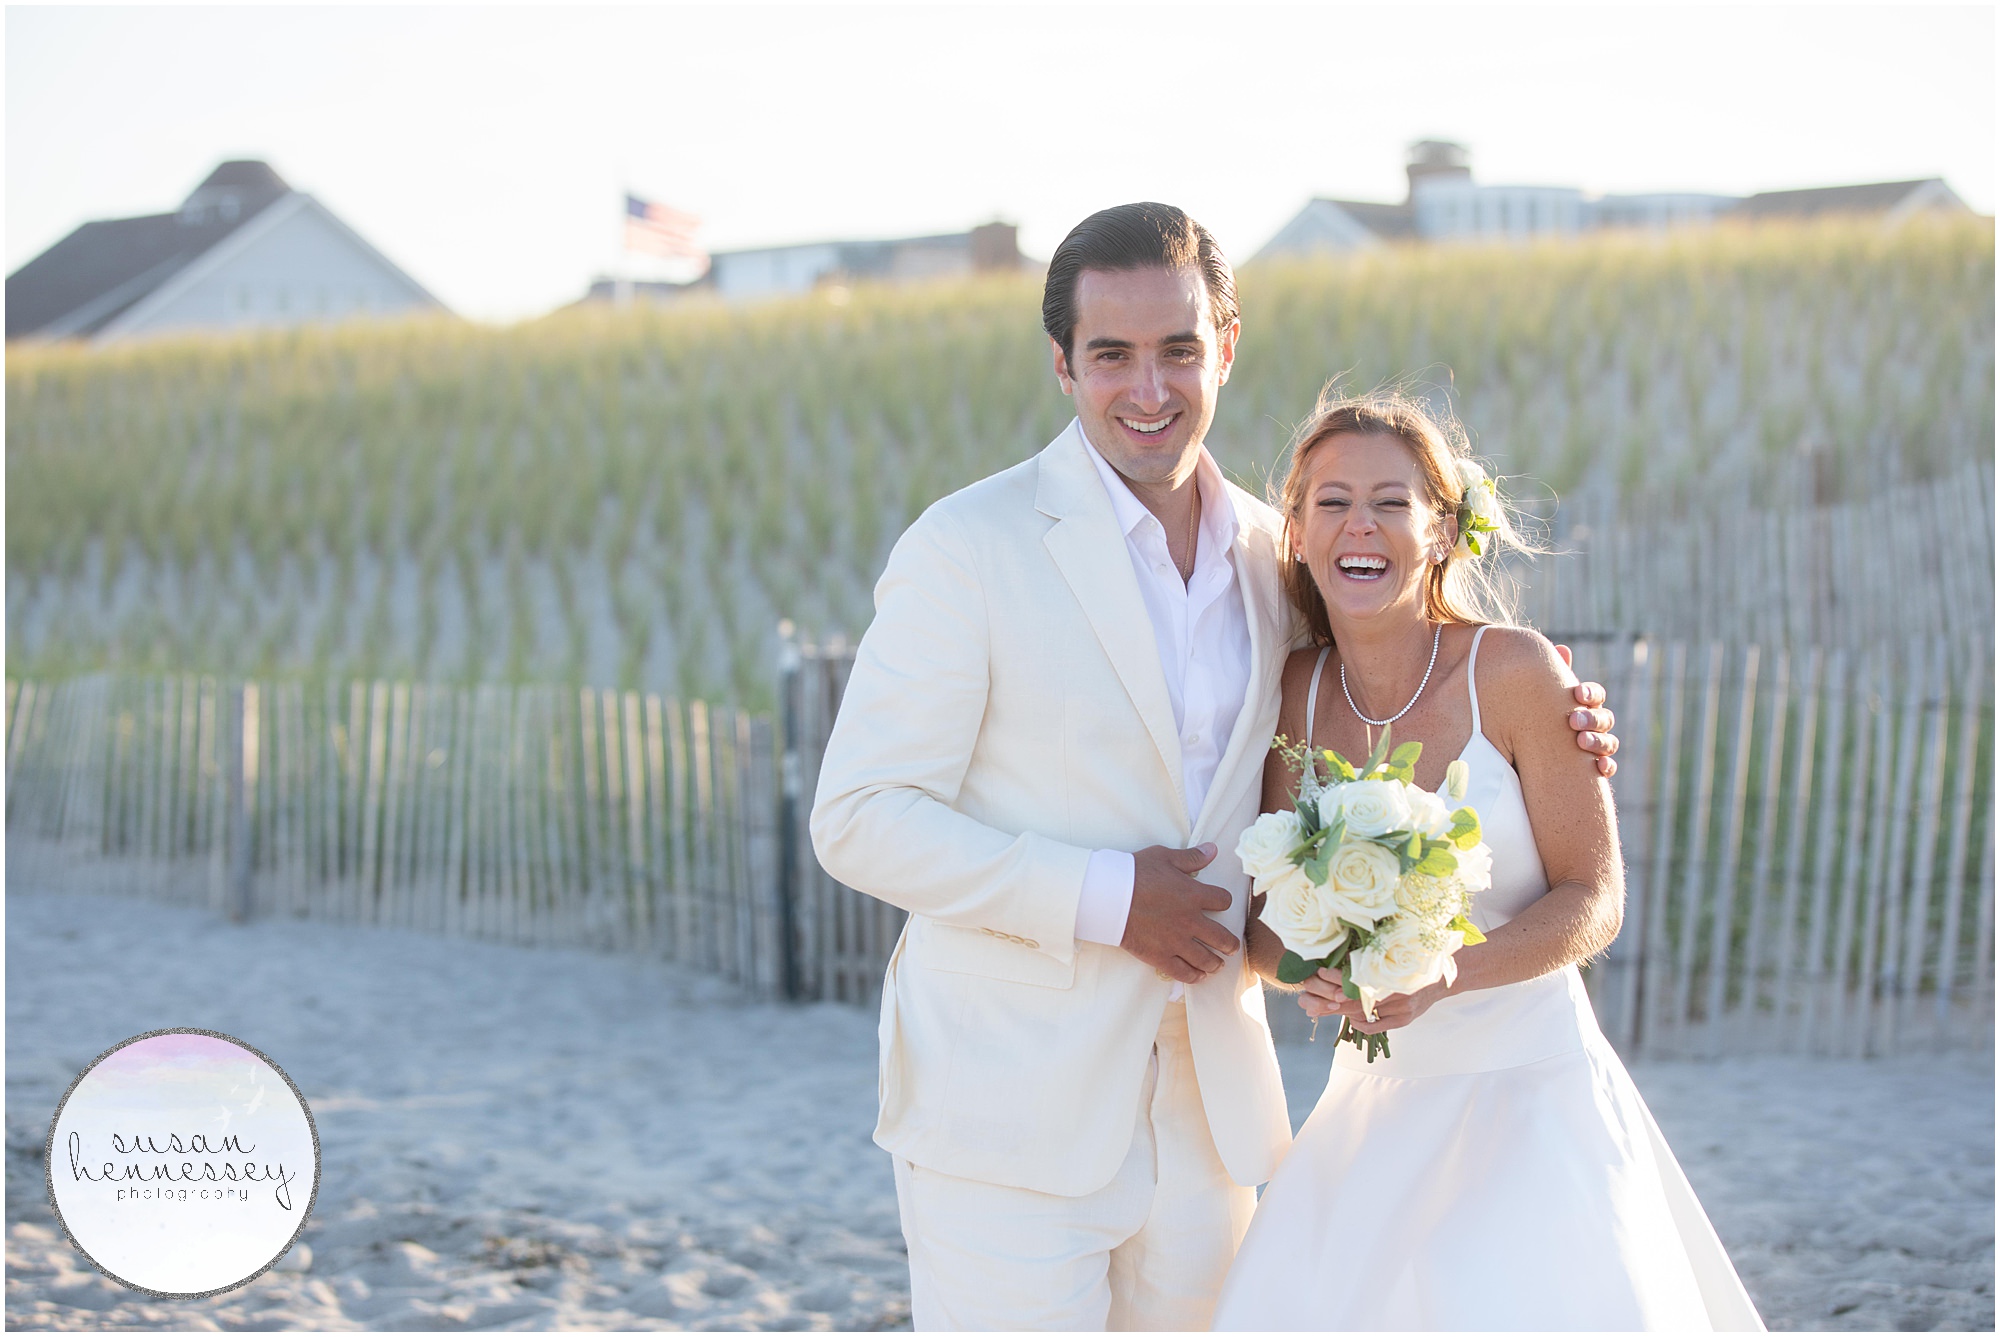 A happy couplelaugh at their microwedding in Bay Head, NJ